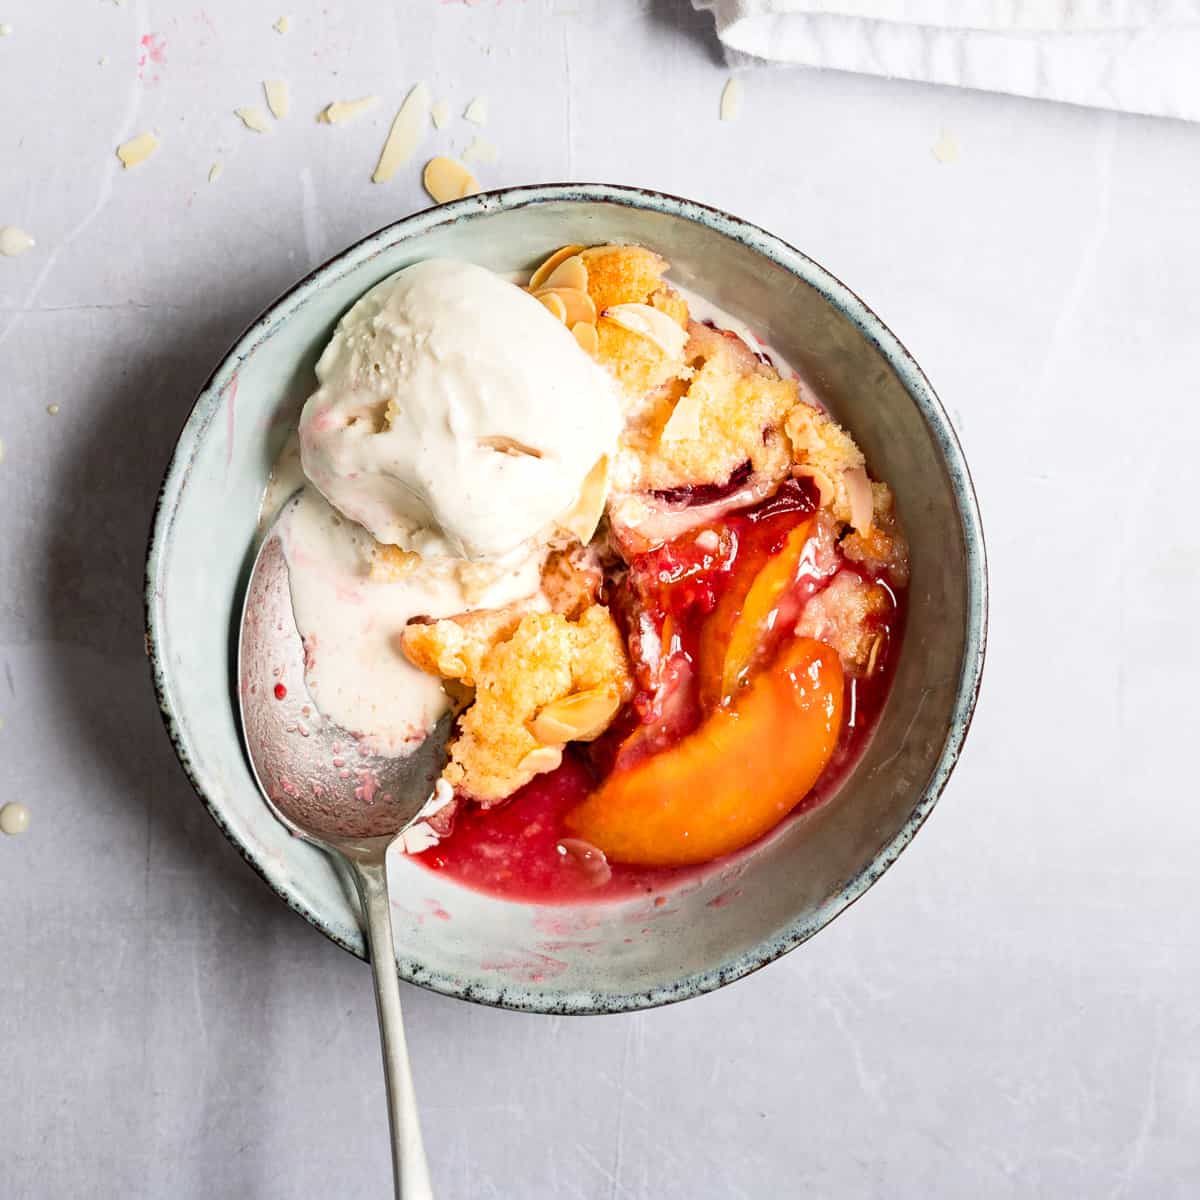 Peach and raspberry cobbler in a blue bowl with ice cream